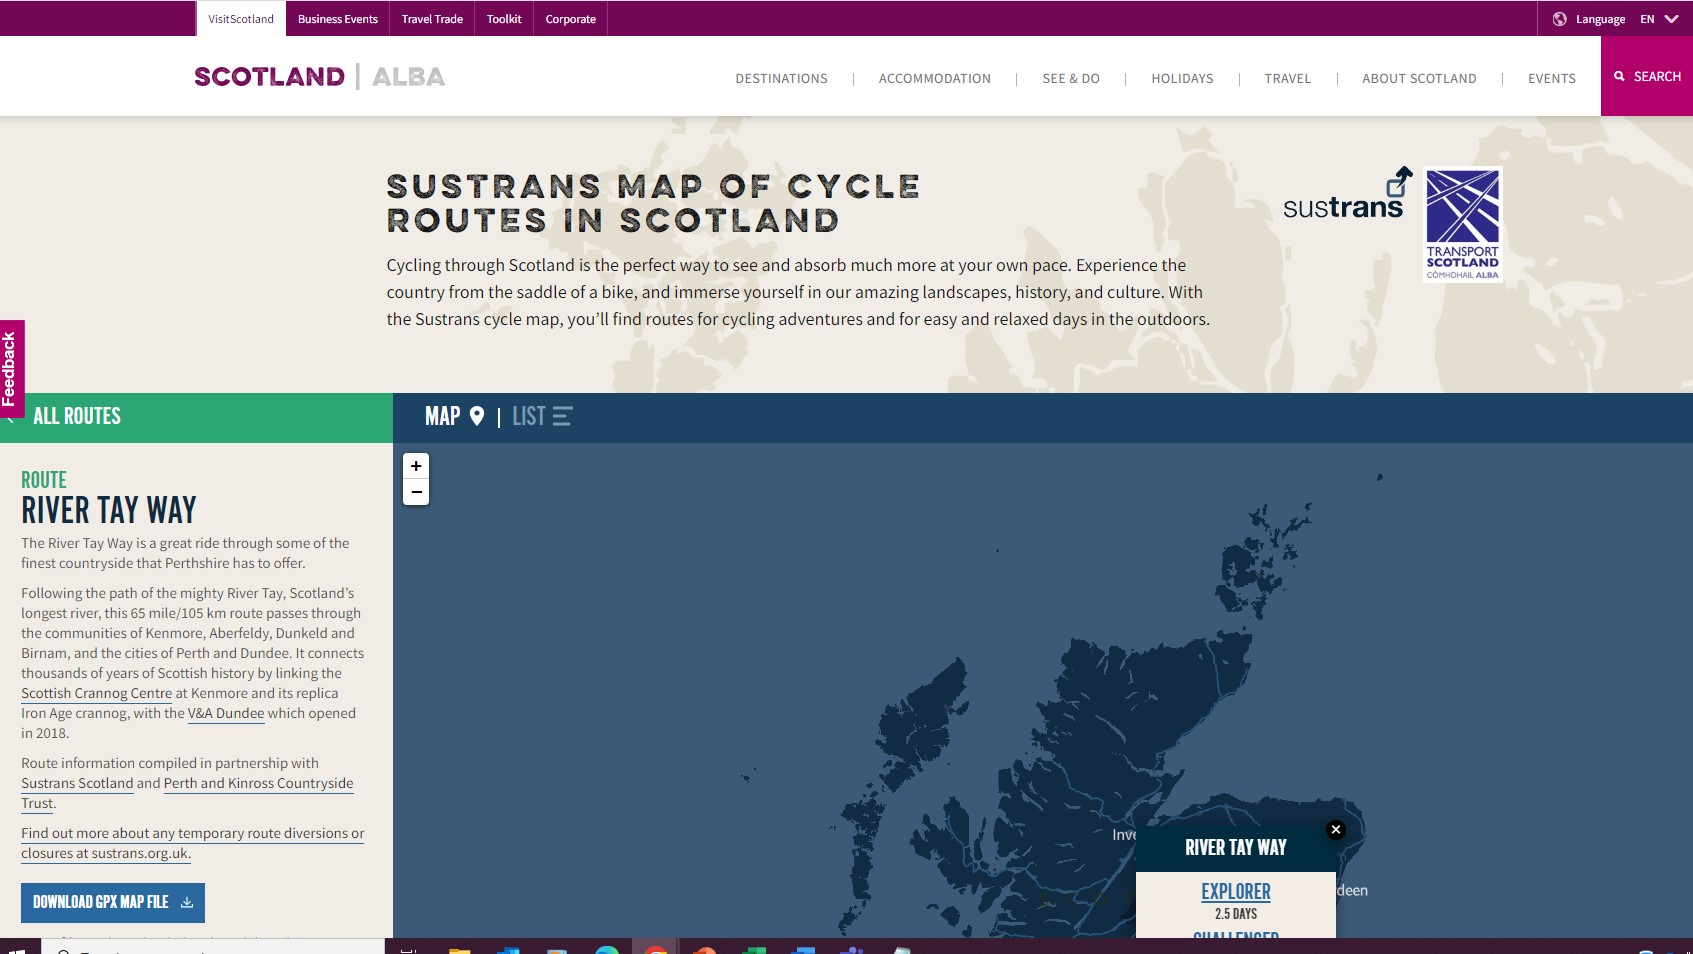 Screen grab of a cycle route map detailing the River Tay Way